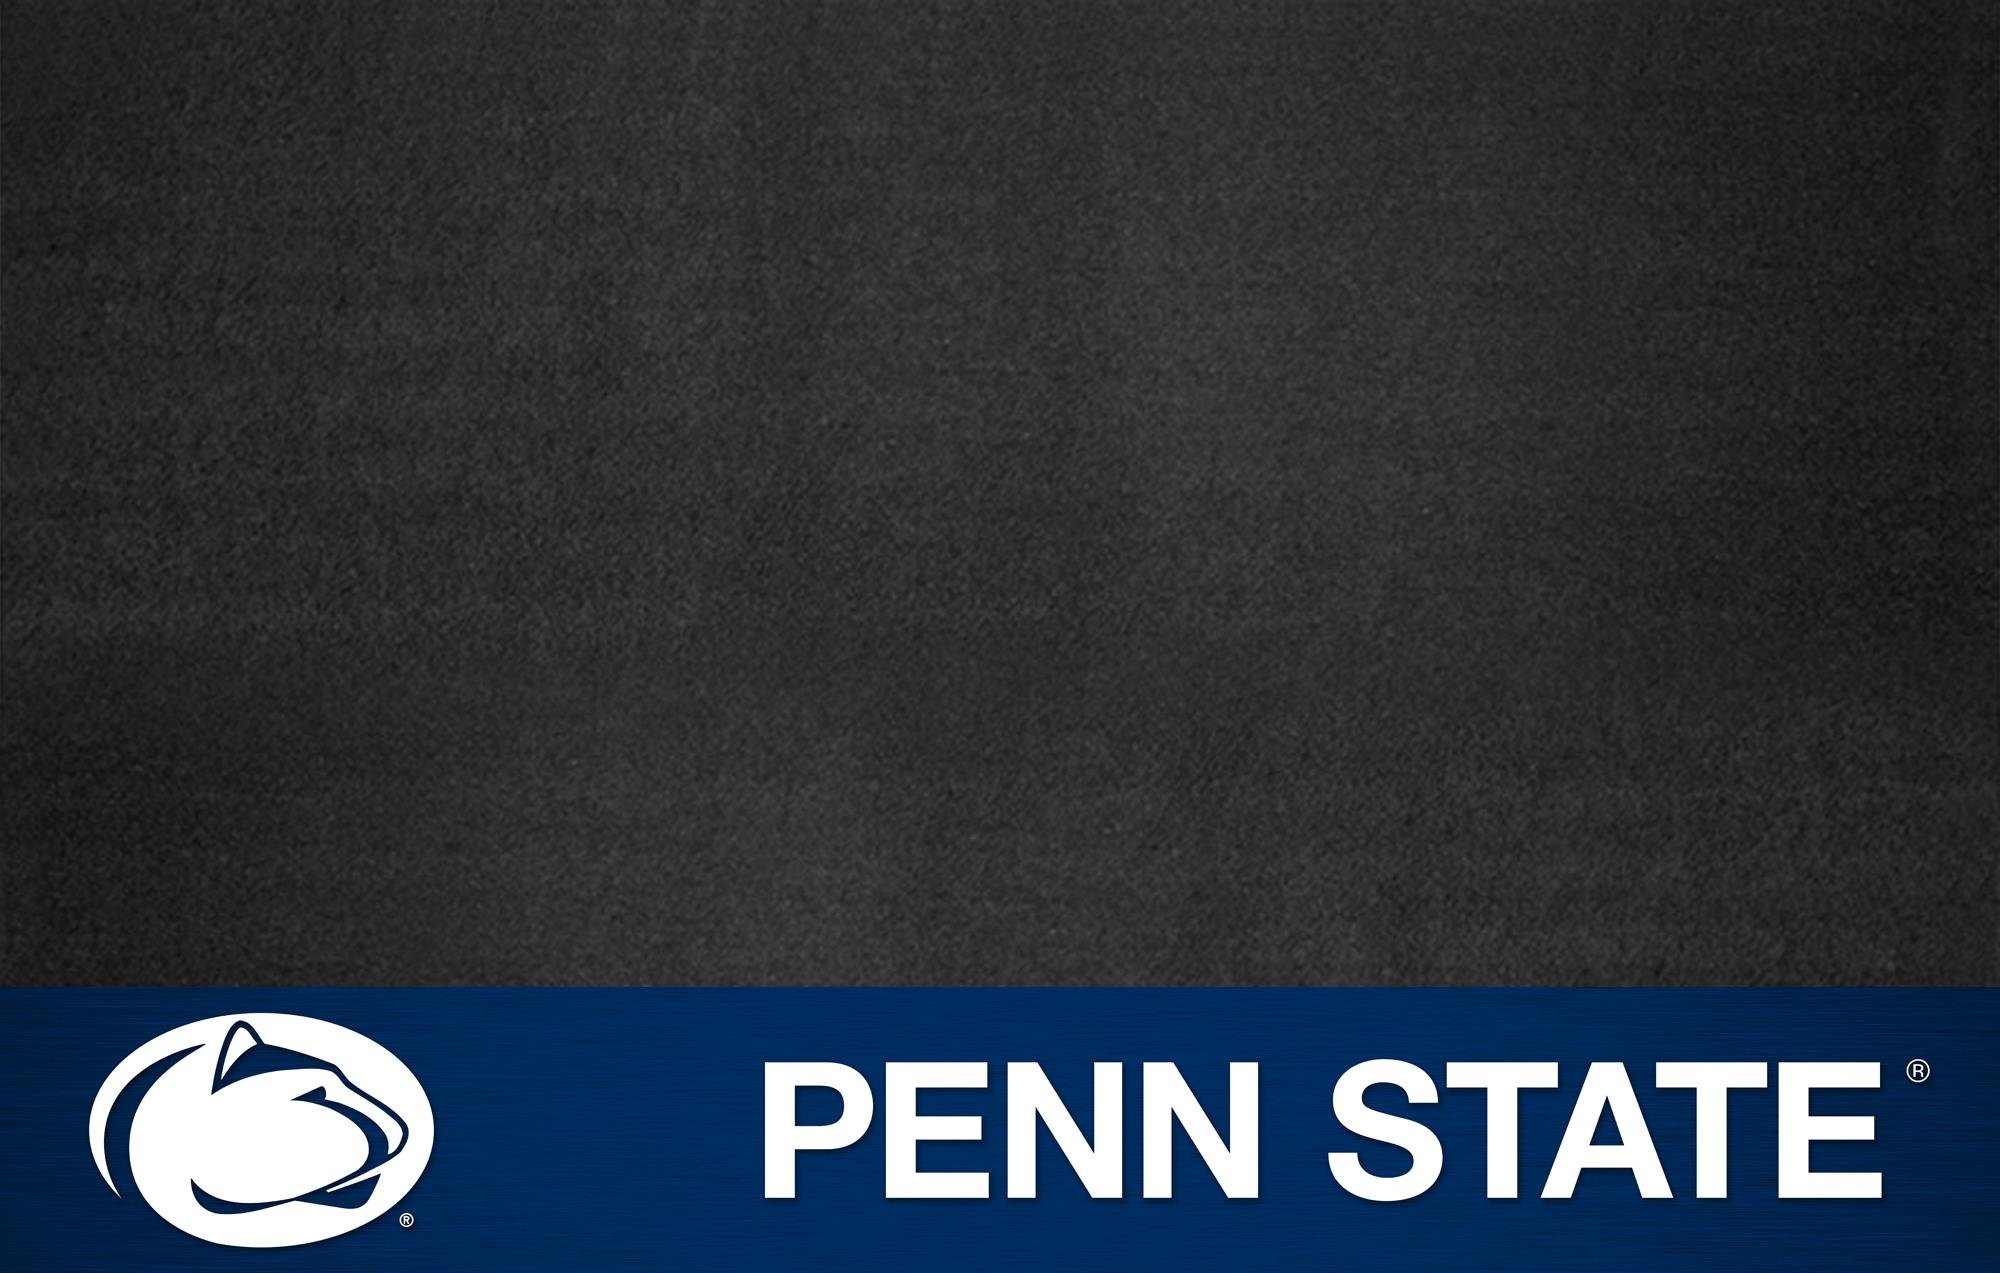 Penn State Nittany Lions College Football Wallpaper Background